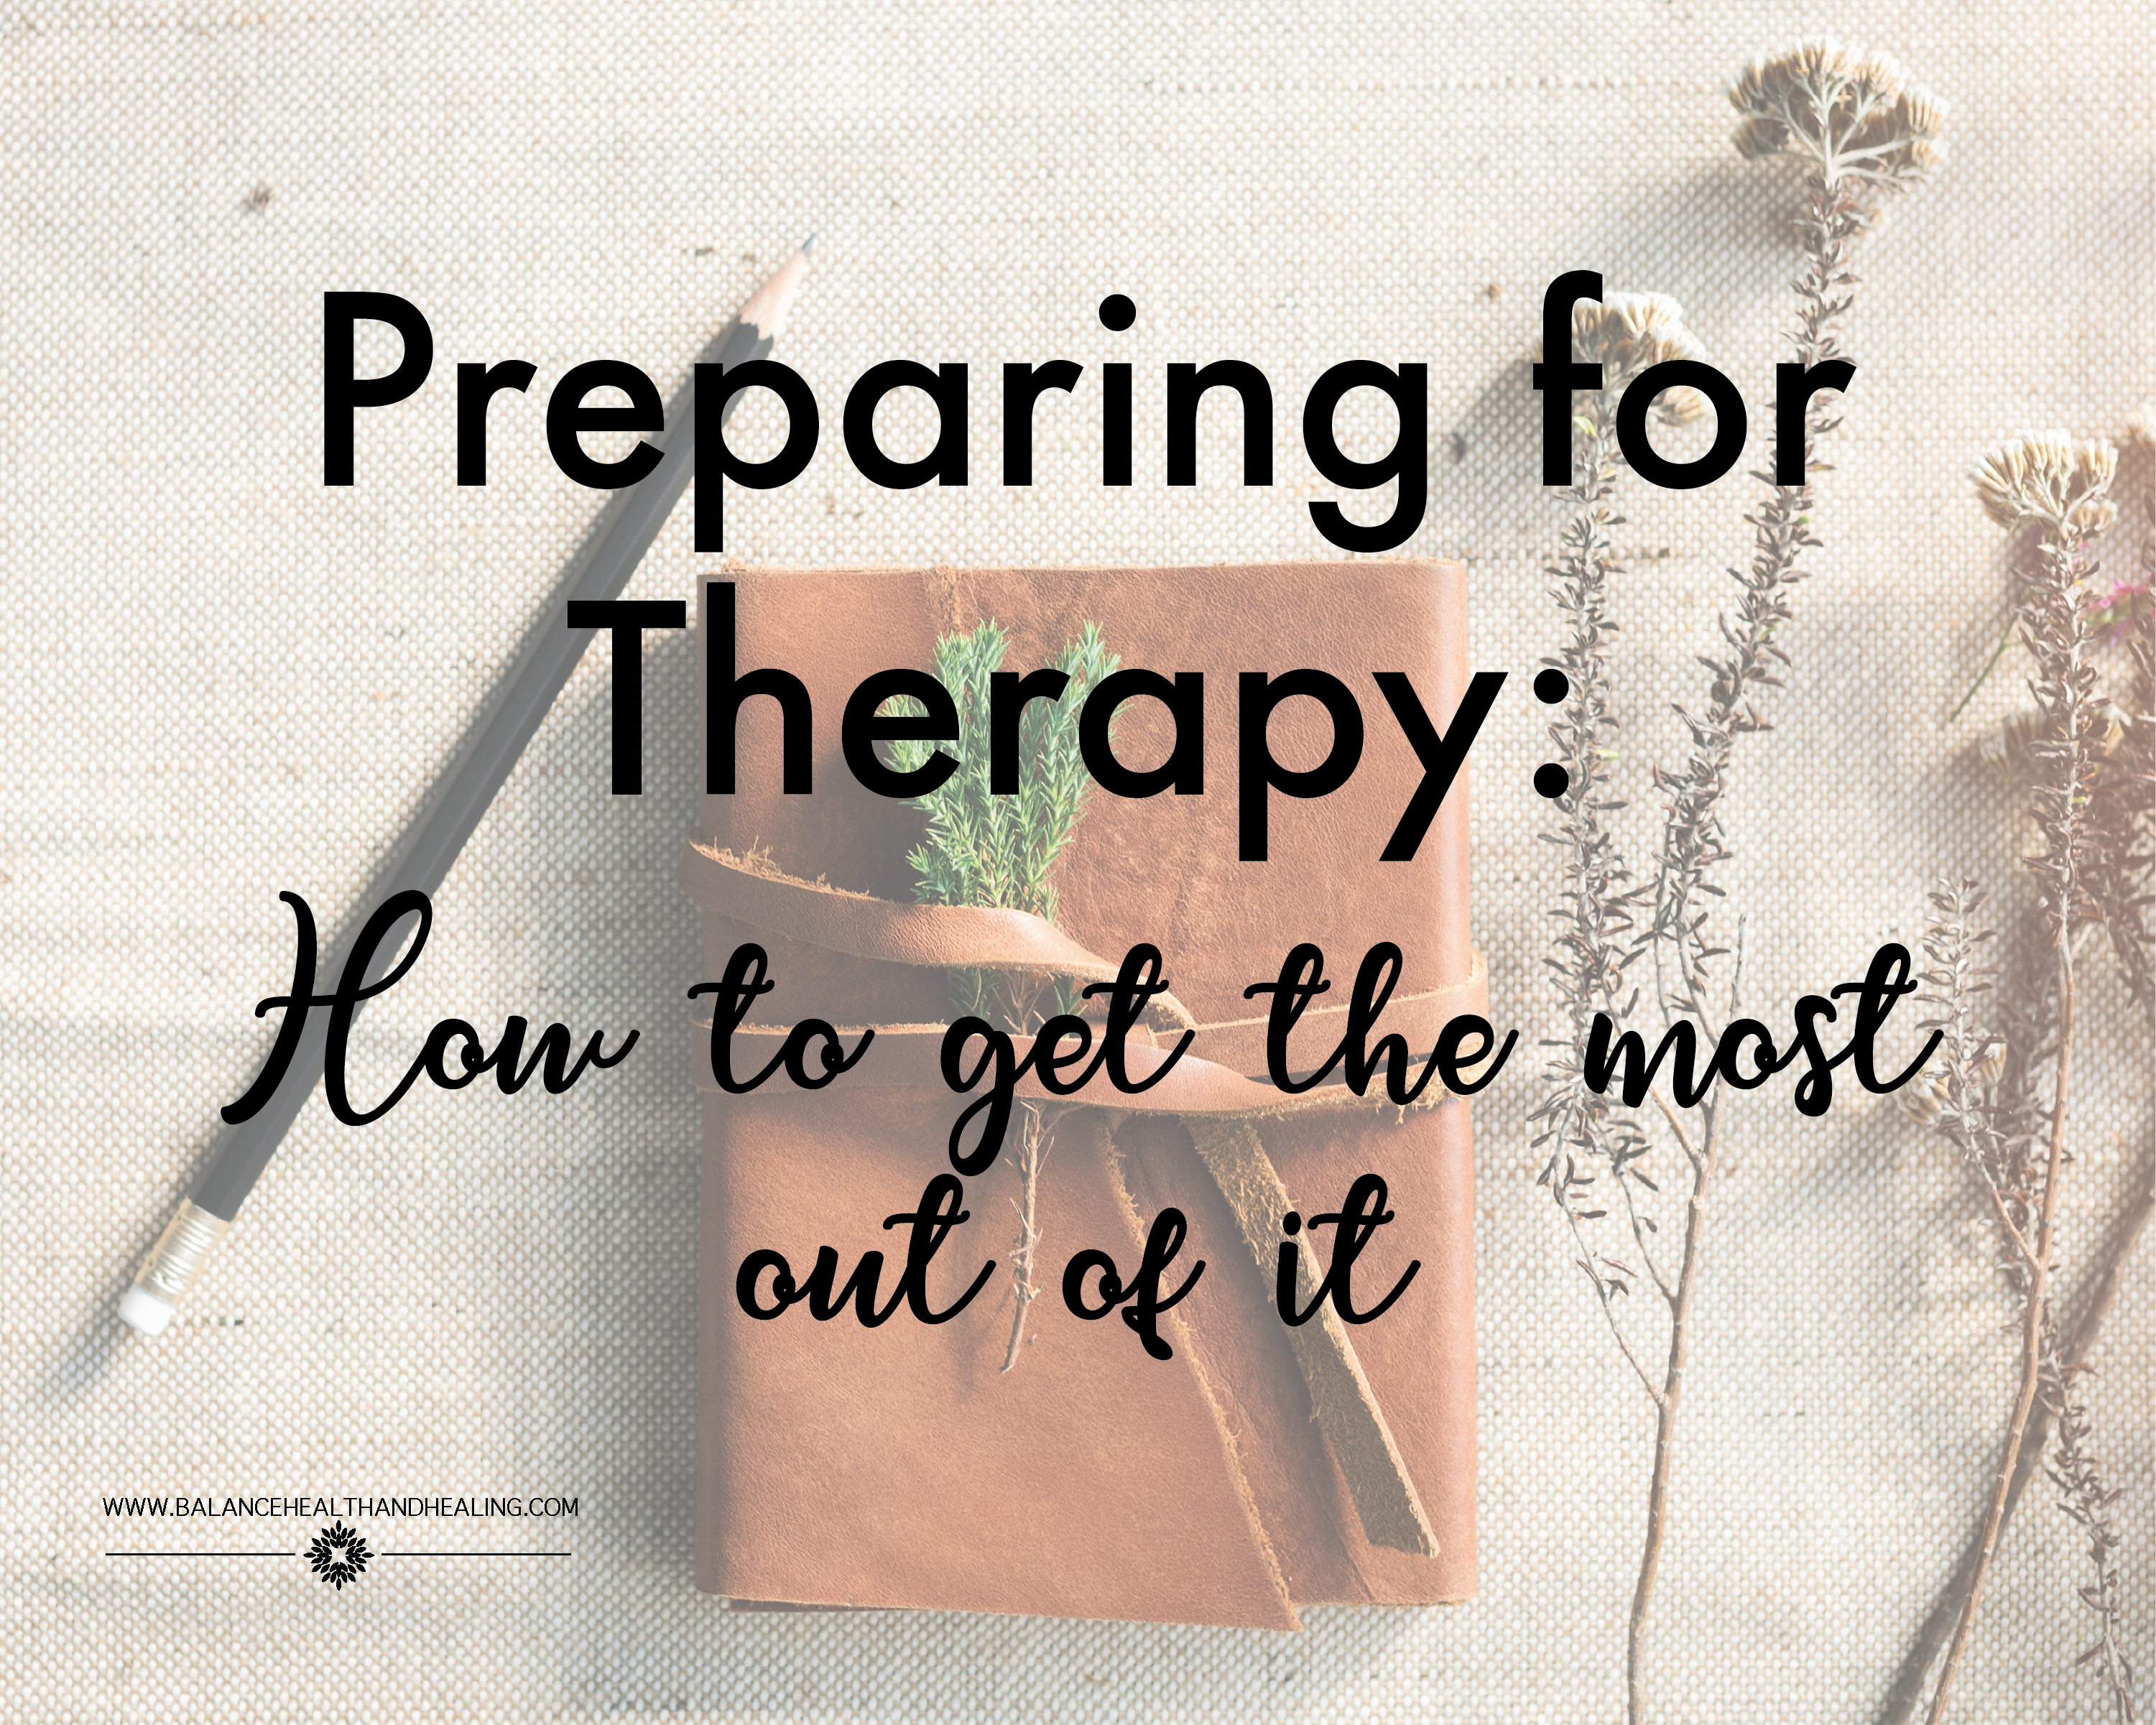 Preparing for Therapy: How to get the most out of it